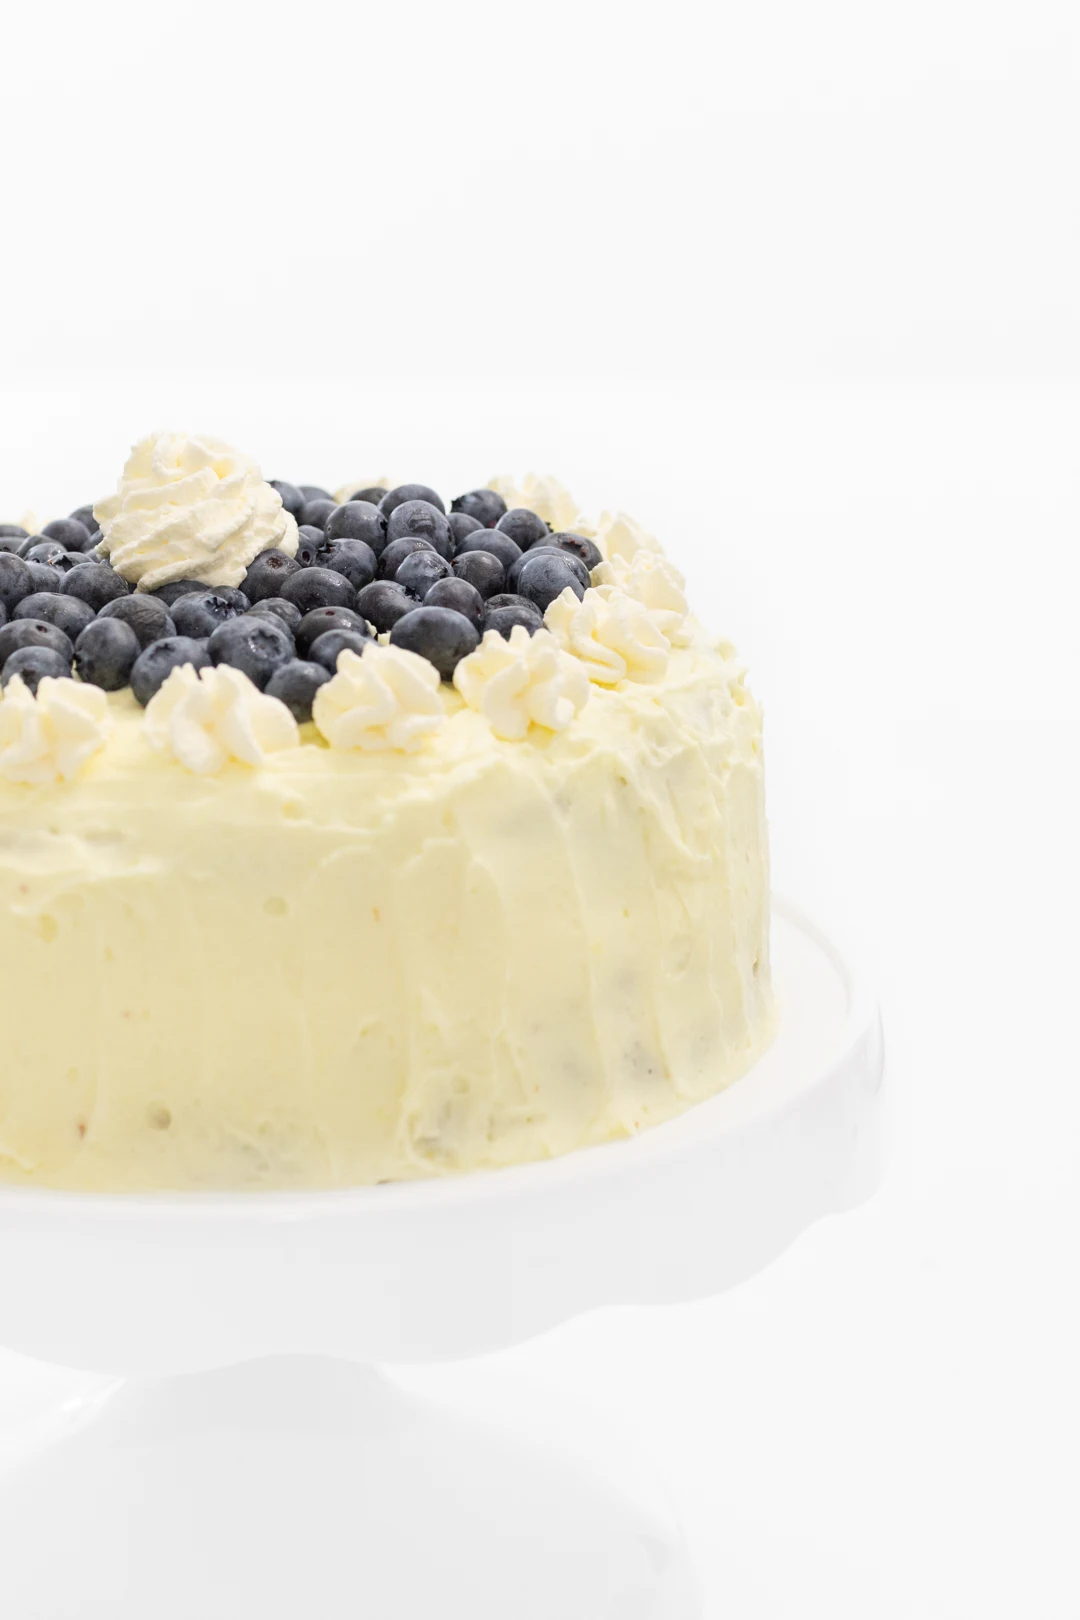 Simple lemon frosted cake with fresh blueberries.